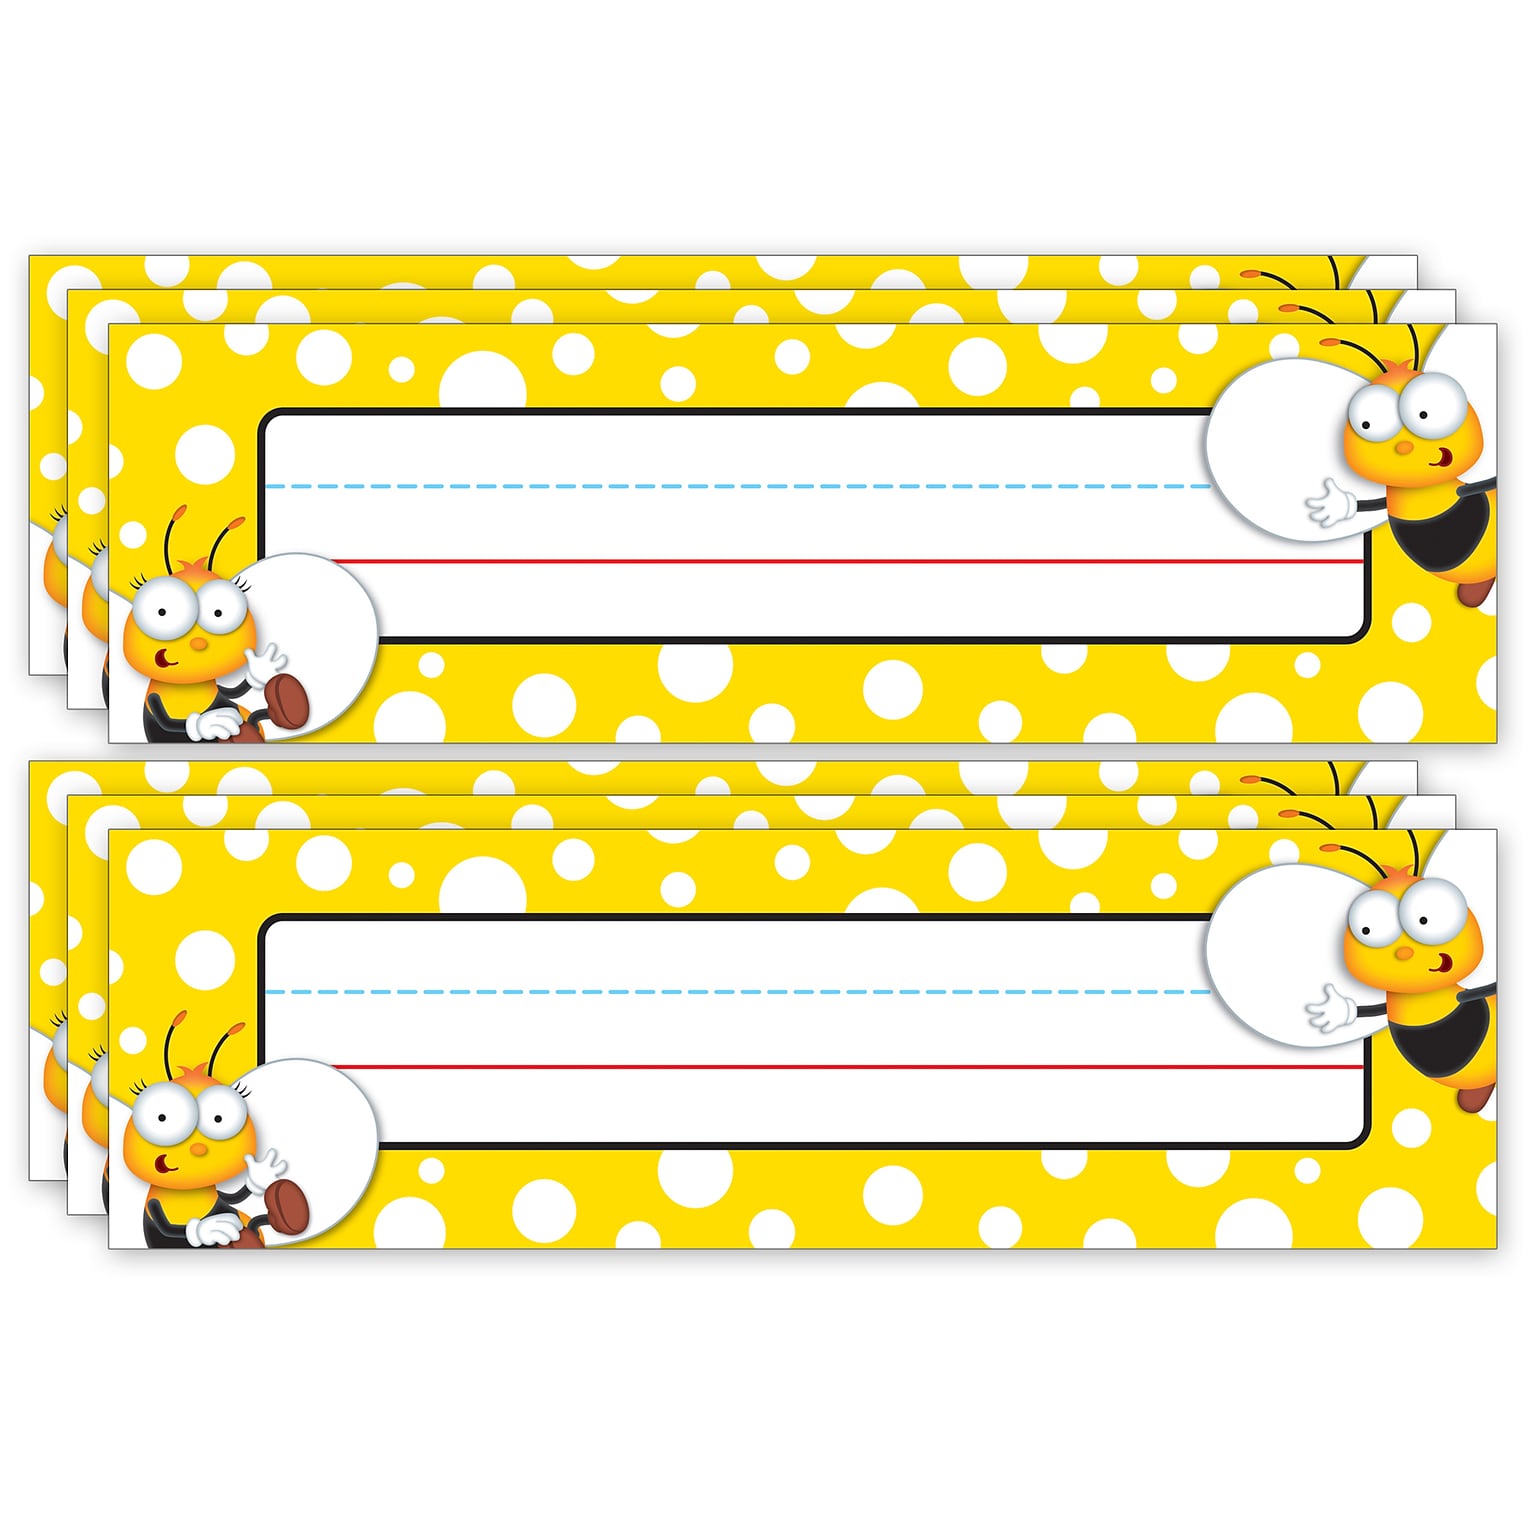 Carson Dellosa Education Buzz-Worthy Bees Nameplates, 9.5 x 2.88, 36 Per Pack, 6 Packs (CD-122033-6)